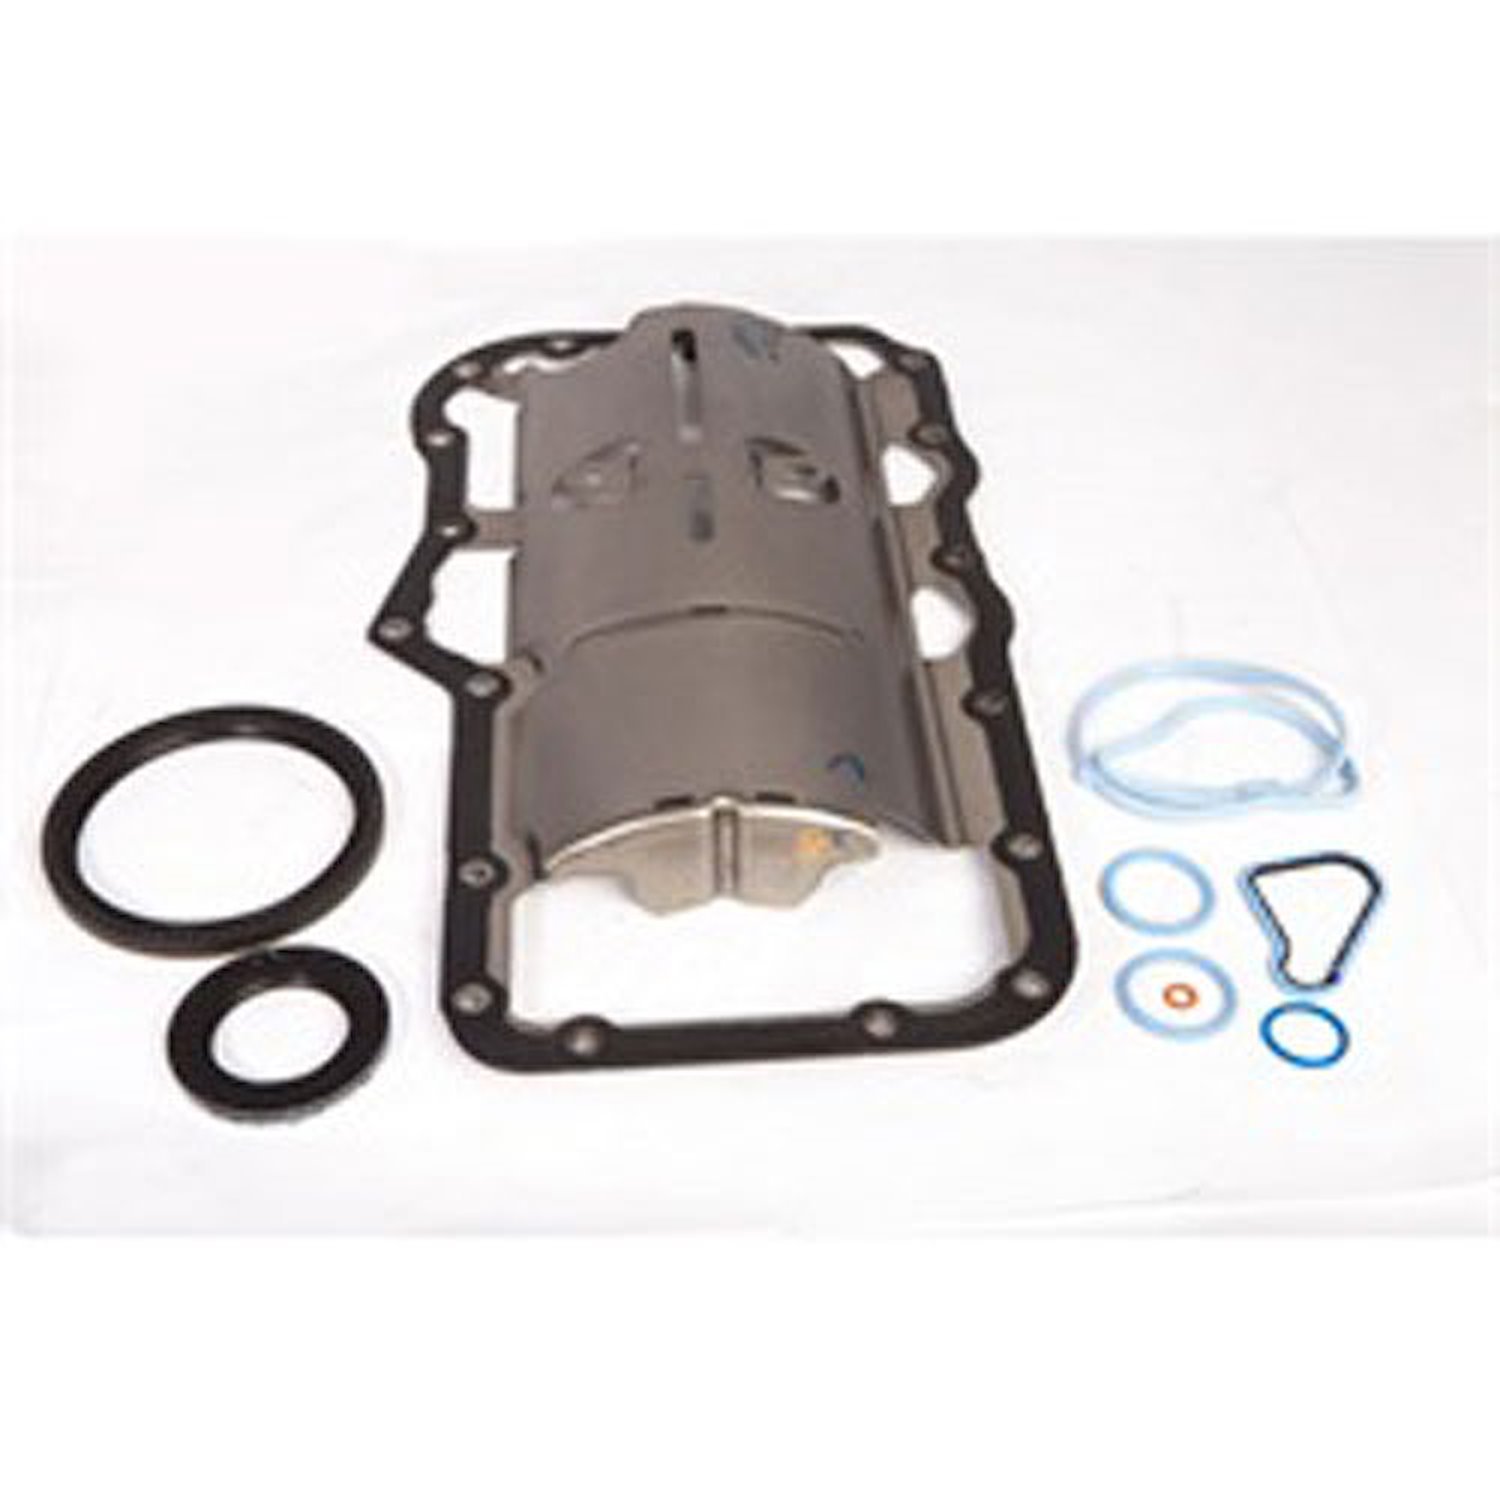 This intake manifold gasket set from Omix-ADA fits the 5.7L engine found in 05-08 Jeep Grand Cherokee.